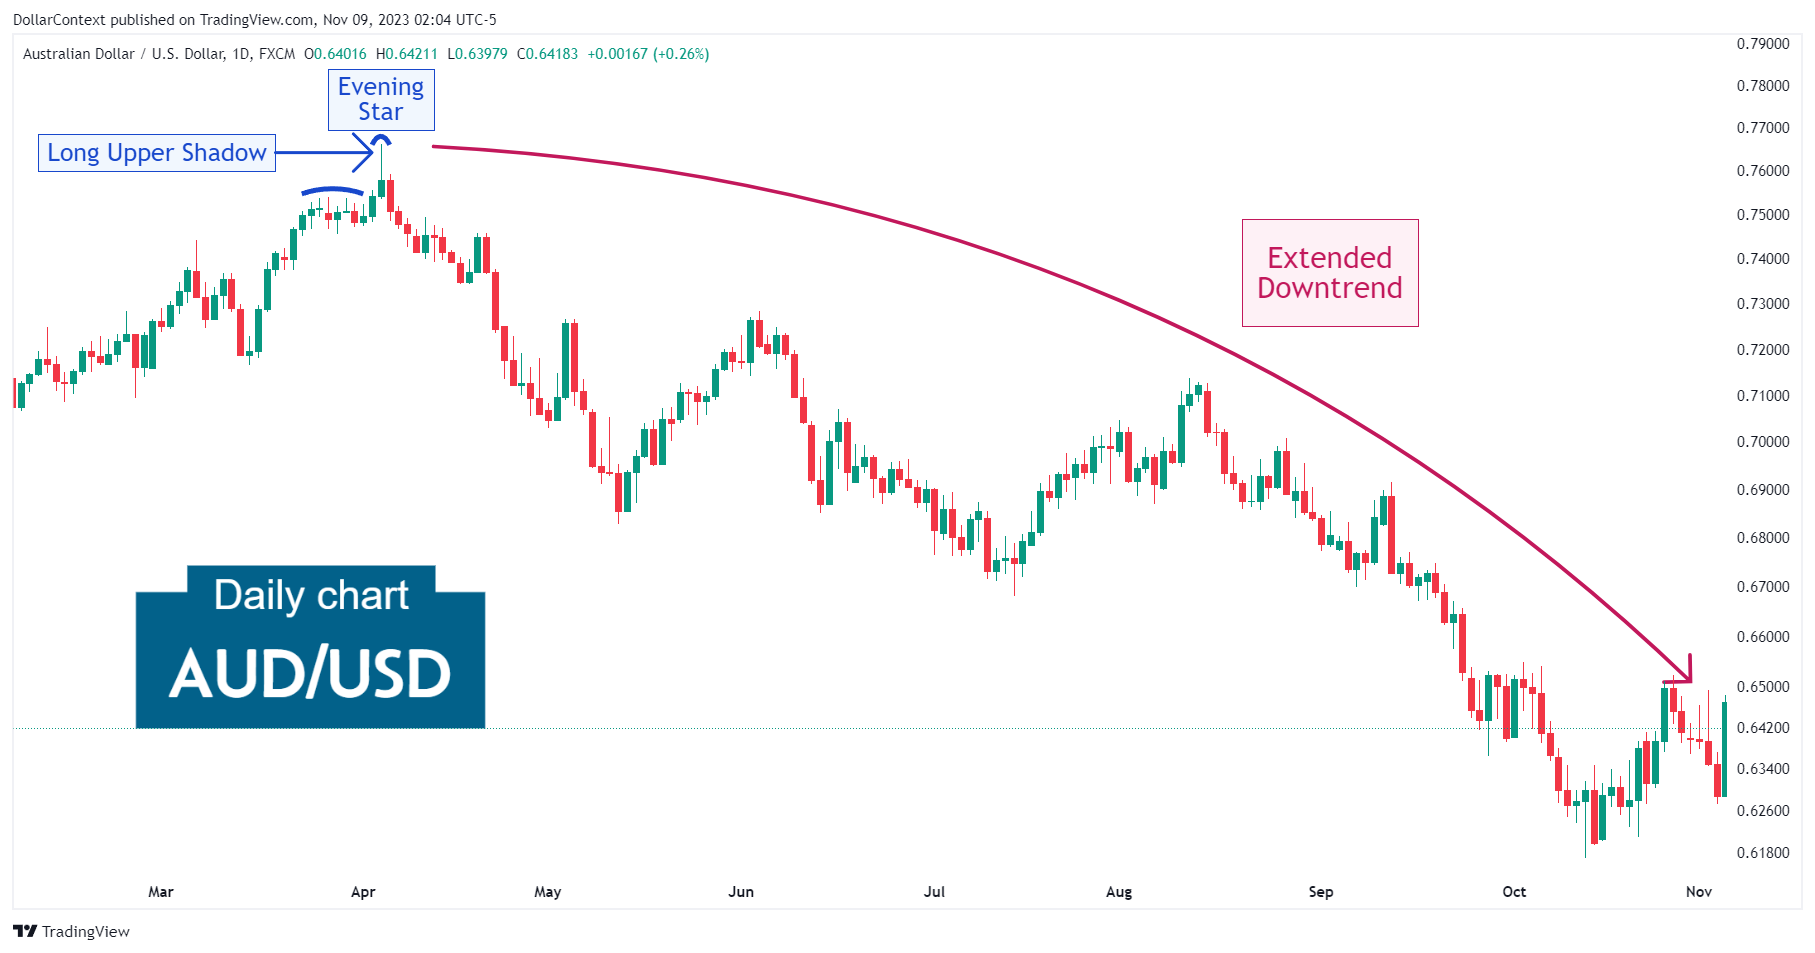 AUD/USD: Downtrend After the Peak in April 2022 (Daily Chart)